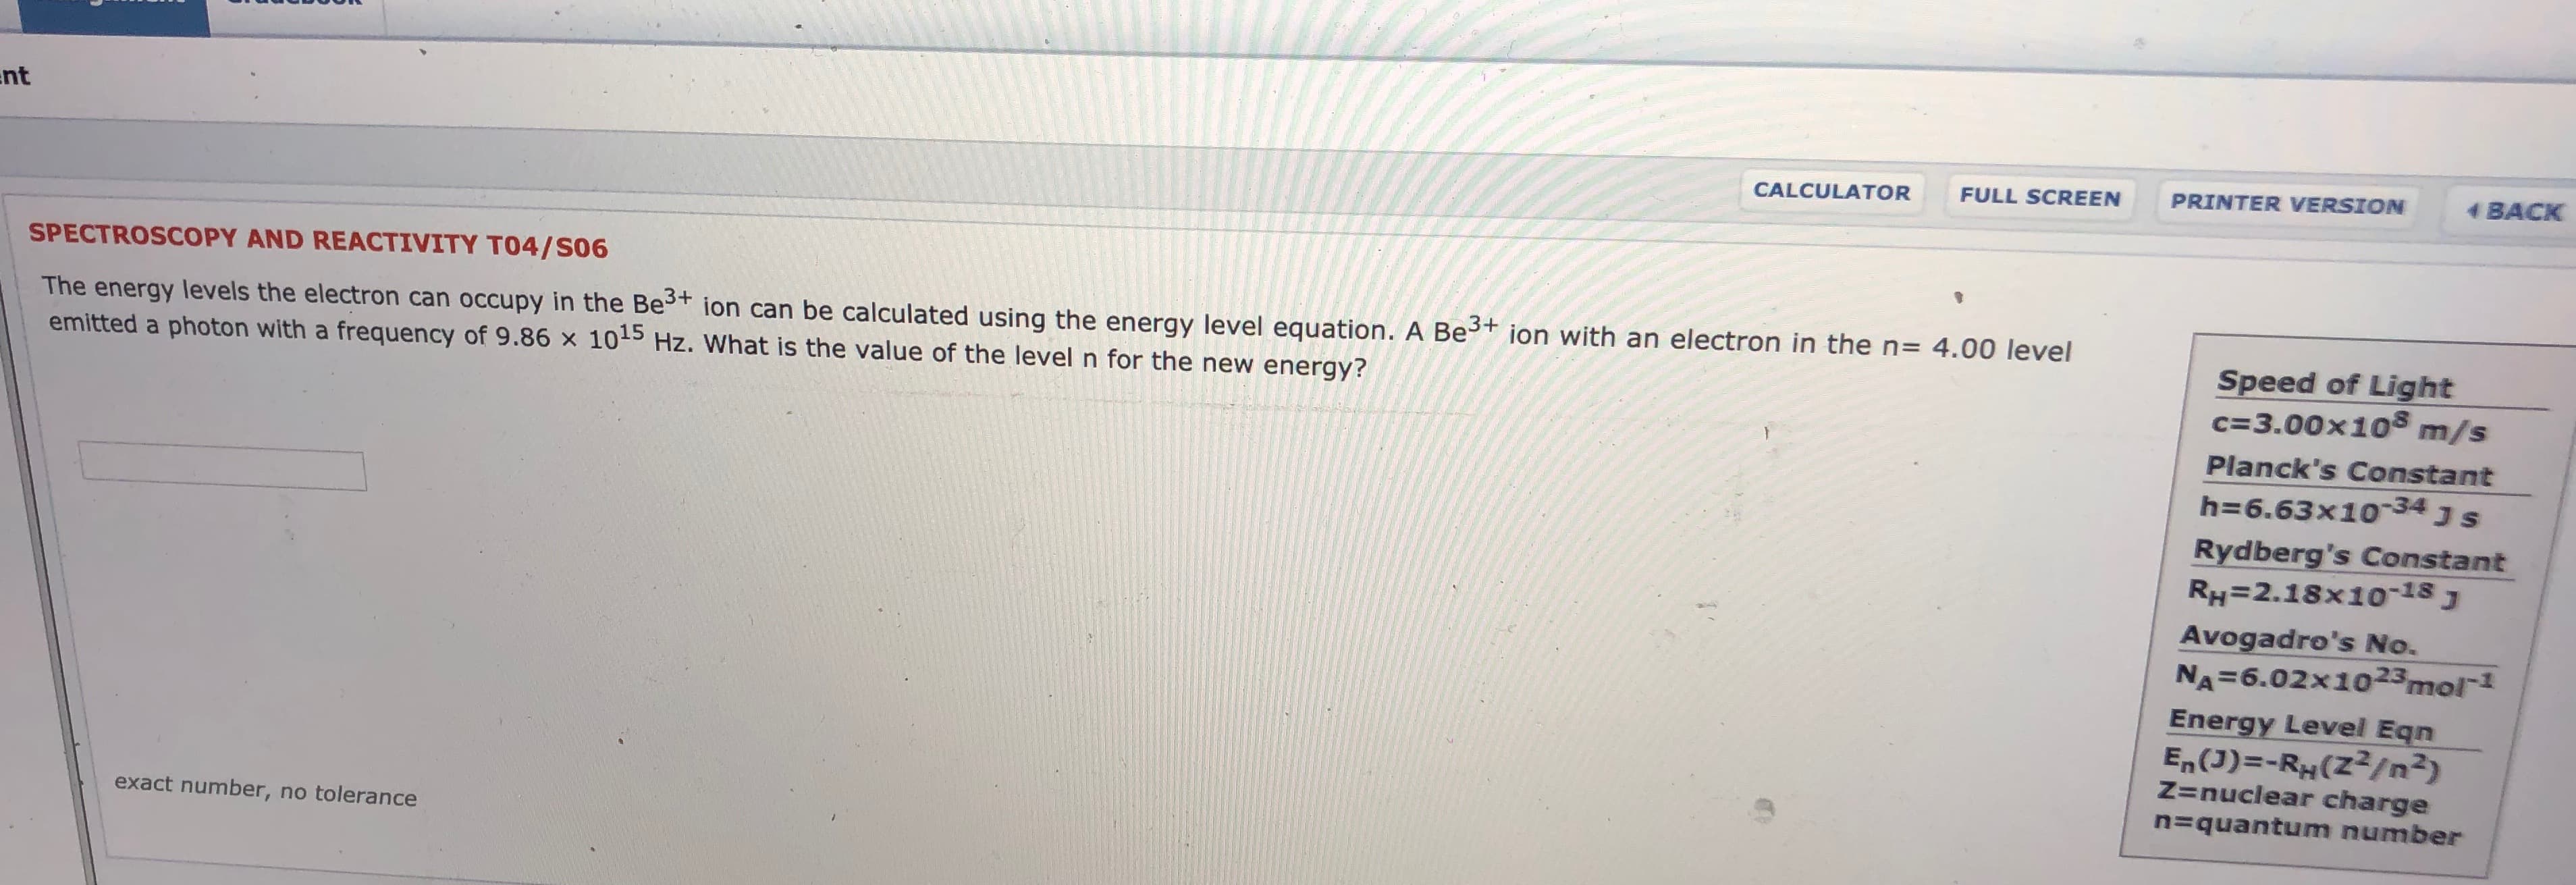 nt
BACK
PRINTER VERSION
FULL SCREEN
CALCULATOR
SPECTROSCOPY AND REACTIVITY TO4/S06
The energy levels the electron can occupy in the Bet ion can be calculated using the energy level equation. A Be
emitted a photon with a frequency of 9.86 x 105 Hz. What is the value of the level n for the new energy?
ion with an electron in the n
4.00 level
Speed of Light
c 3.00x108
m/s
Planck's Constant
h 6.63x1034 J S
Rydberg's Constant
RH=2.18x1o-18J
Avogadro's No.
NA 6.02x1023mol1
Energy Level Eqn
En(J)-RH(Z2/n2)
Z=nuclear charge
=quantum number
exact number, no tolerance
